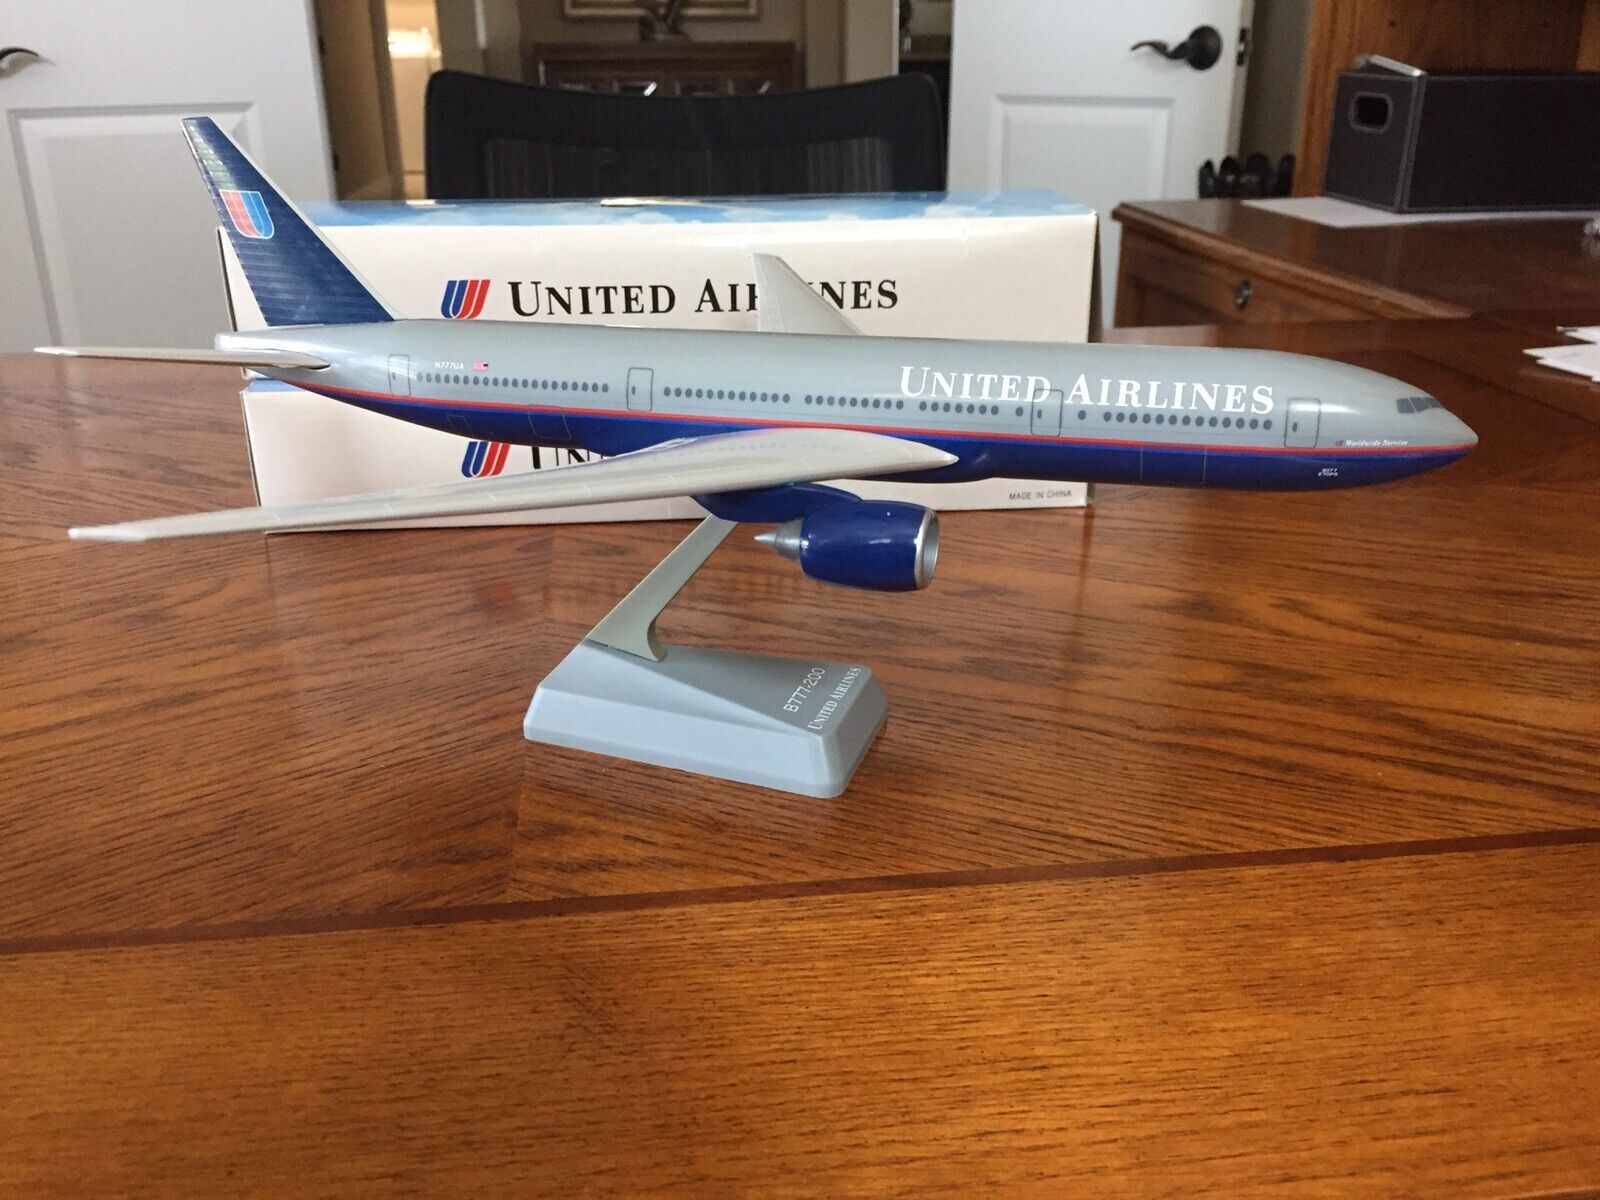 United Airlines 777-200 Molded Plastic Airplane Model by Flight Miniatures Inc.